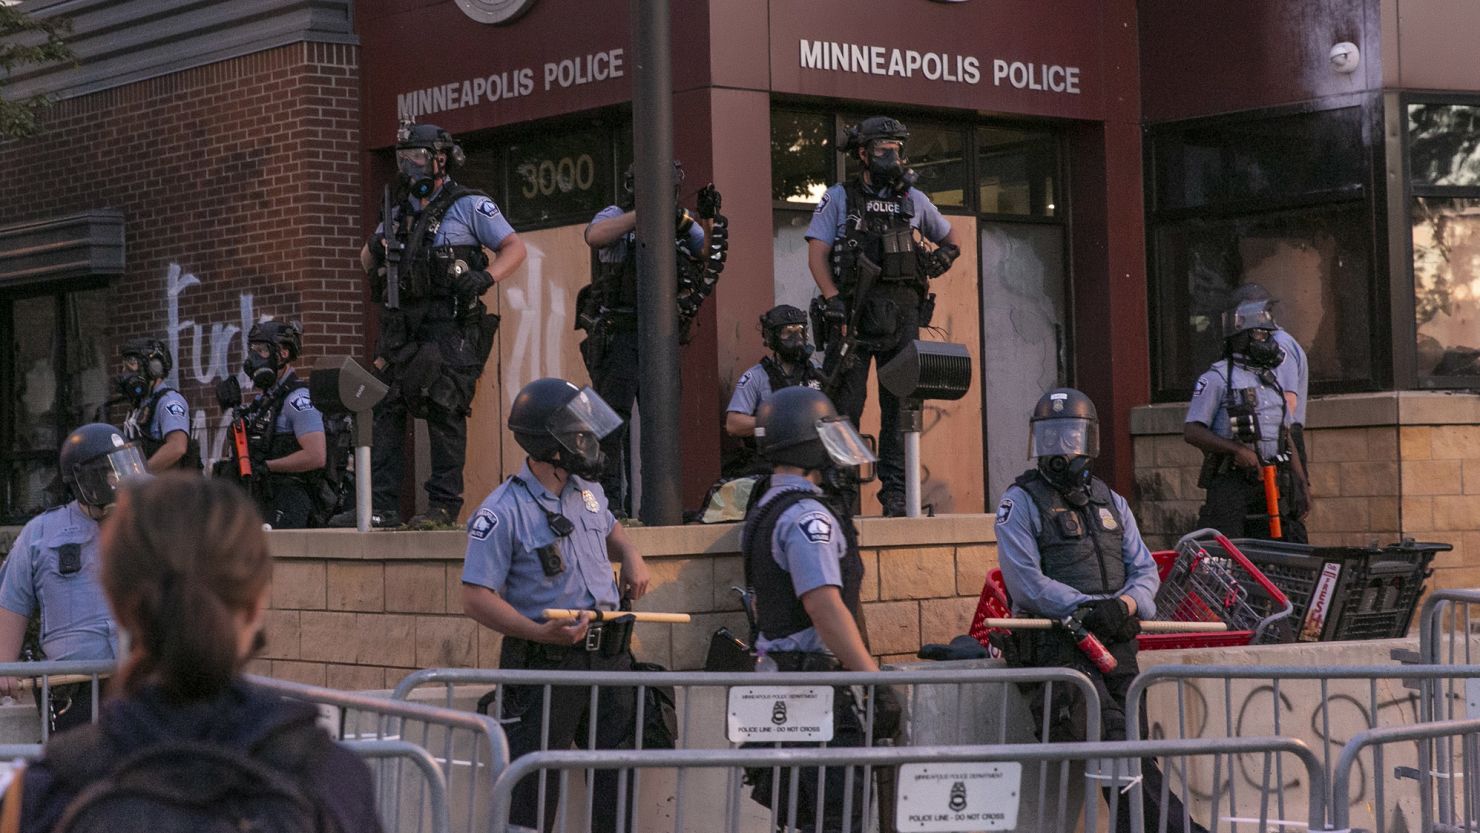 Police stand guard at a Minneapolis Police precinct in Minneapolis on May 27, 2020.